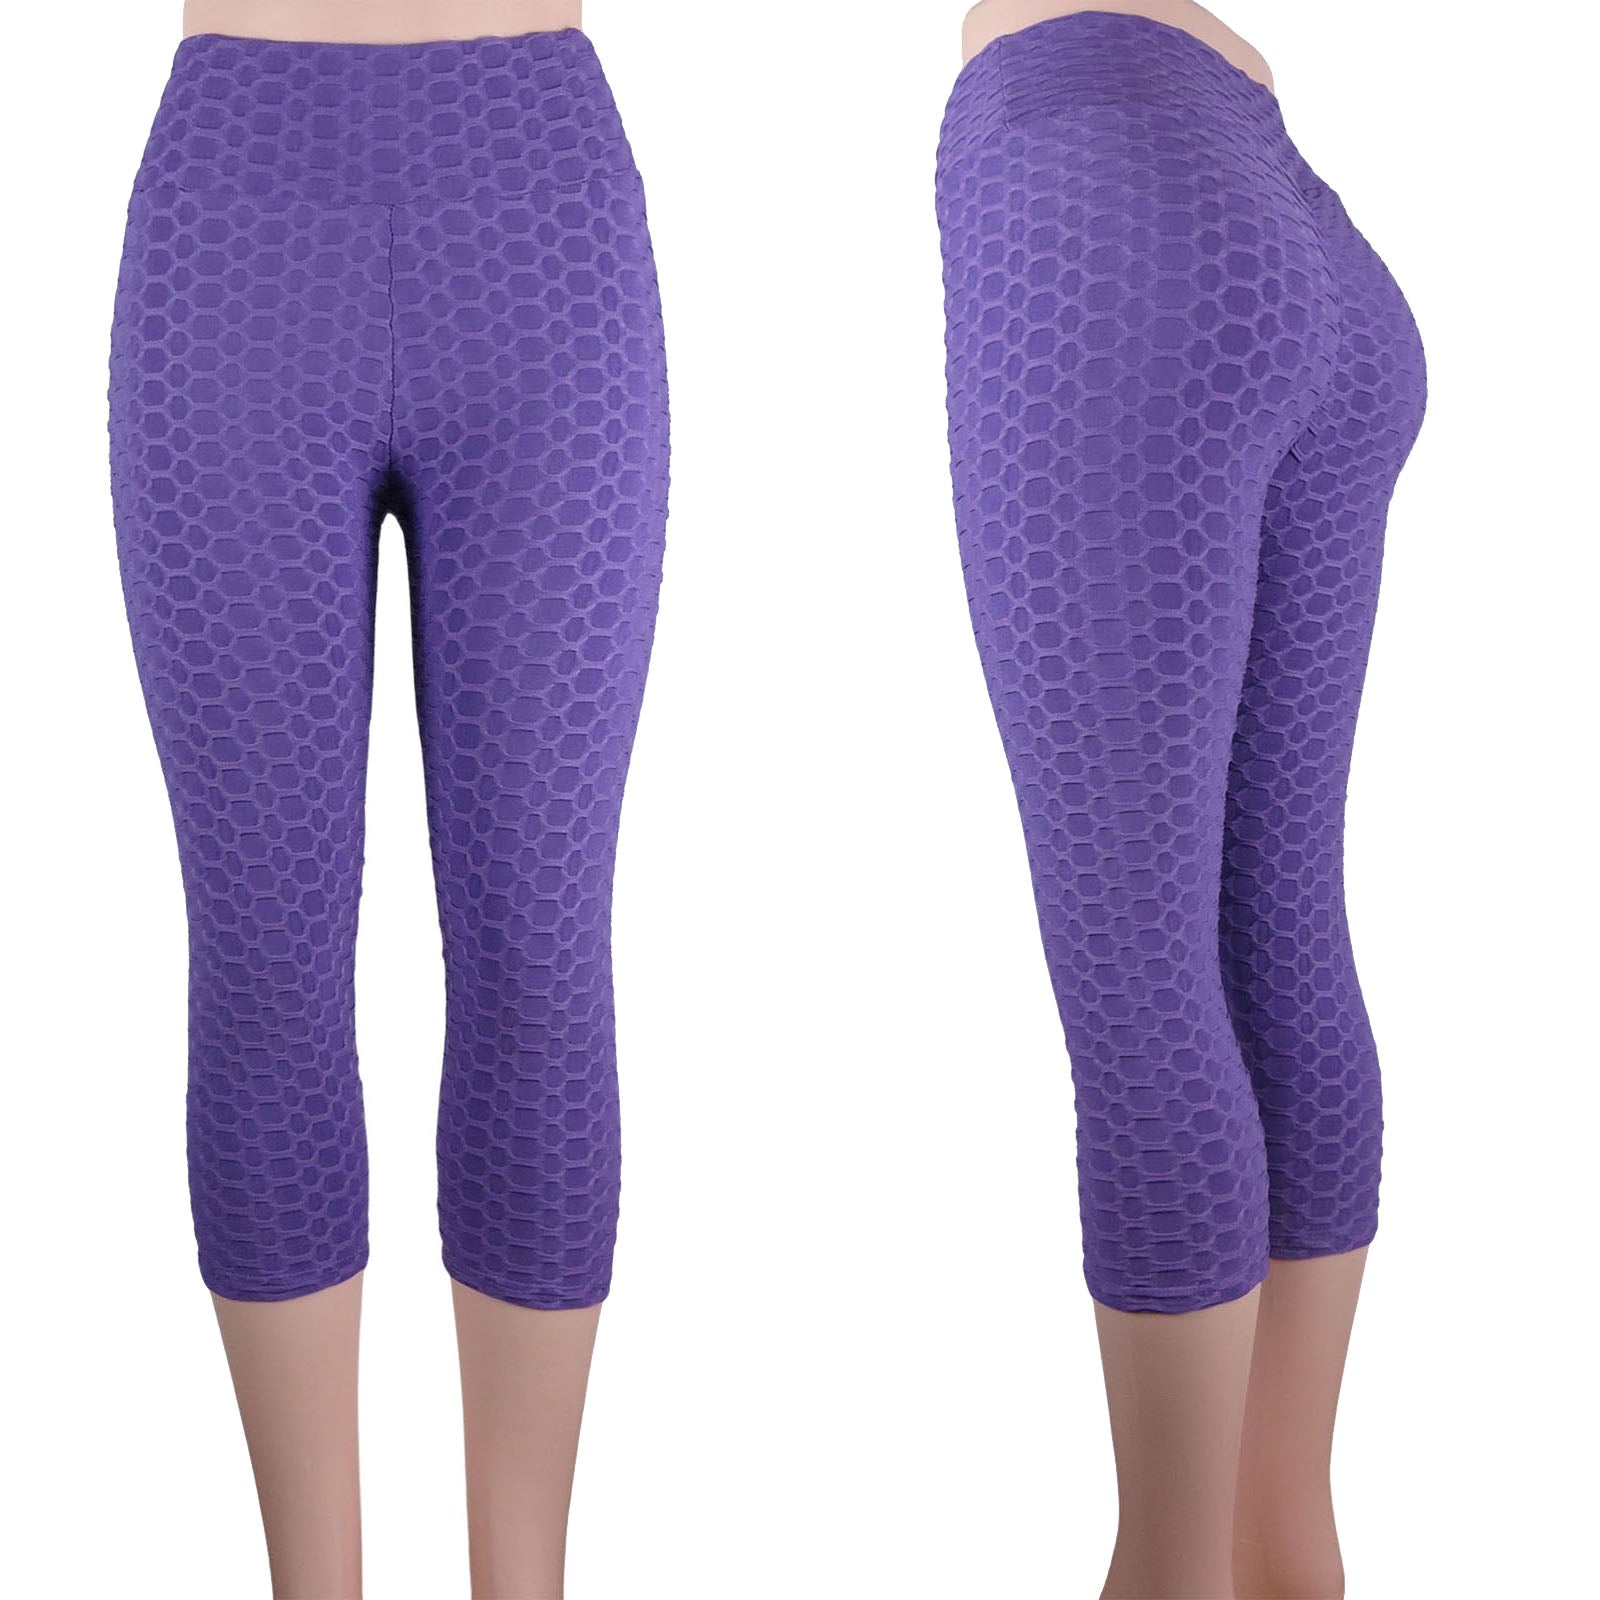 Shakti Purple Leggings Skinny Yoga Pants, High Criss Cross Lace up Slit,  Sexy 3/4 Pants, Natural Fibers, Ecoluxe for Every Occasion -  Canada